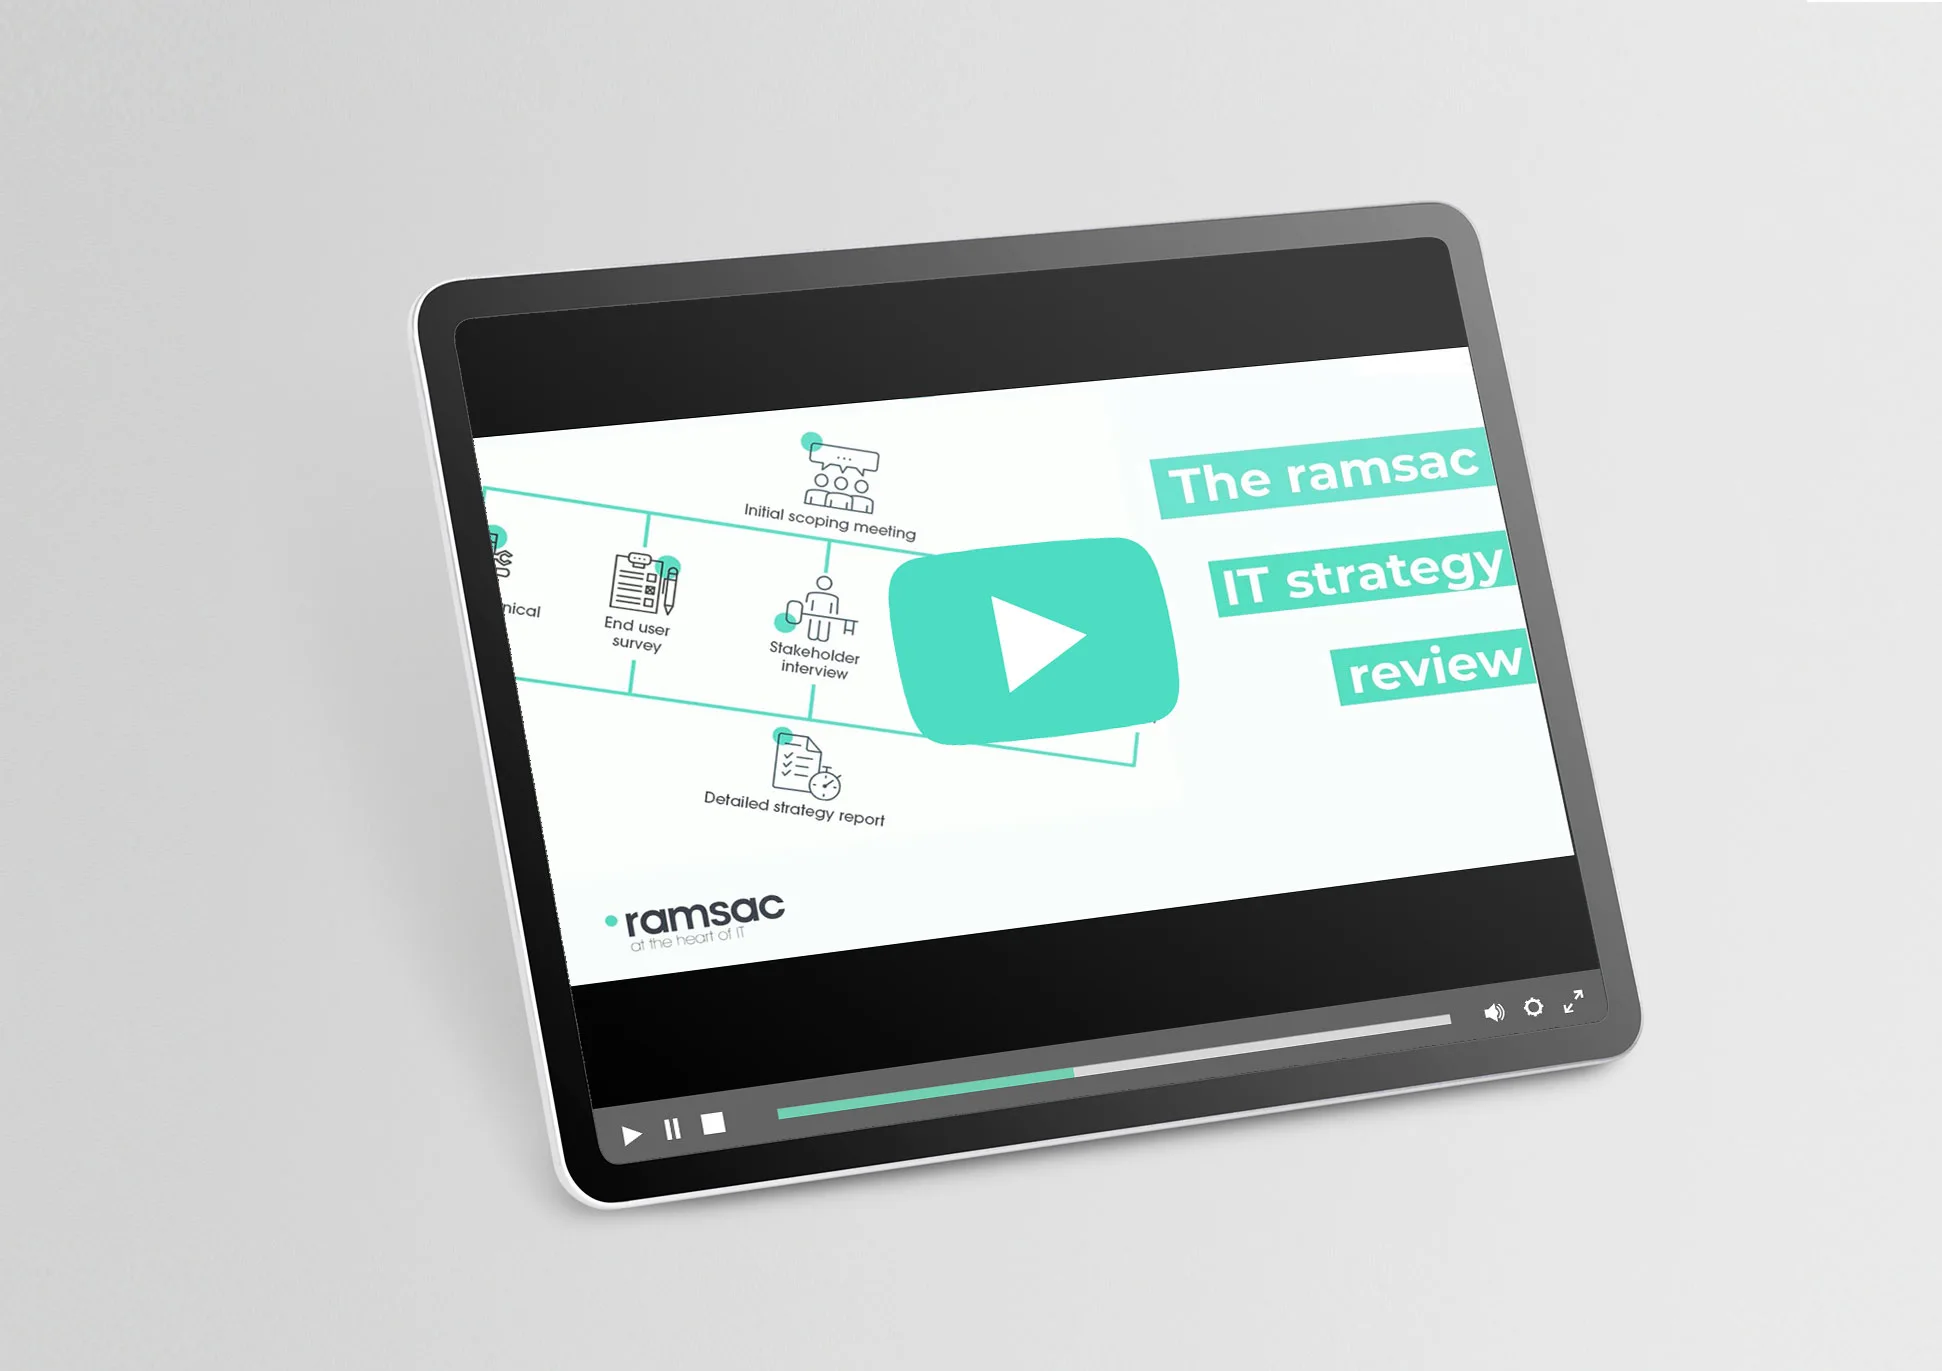 Video: The ramsac IT strategy review service